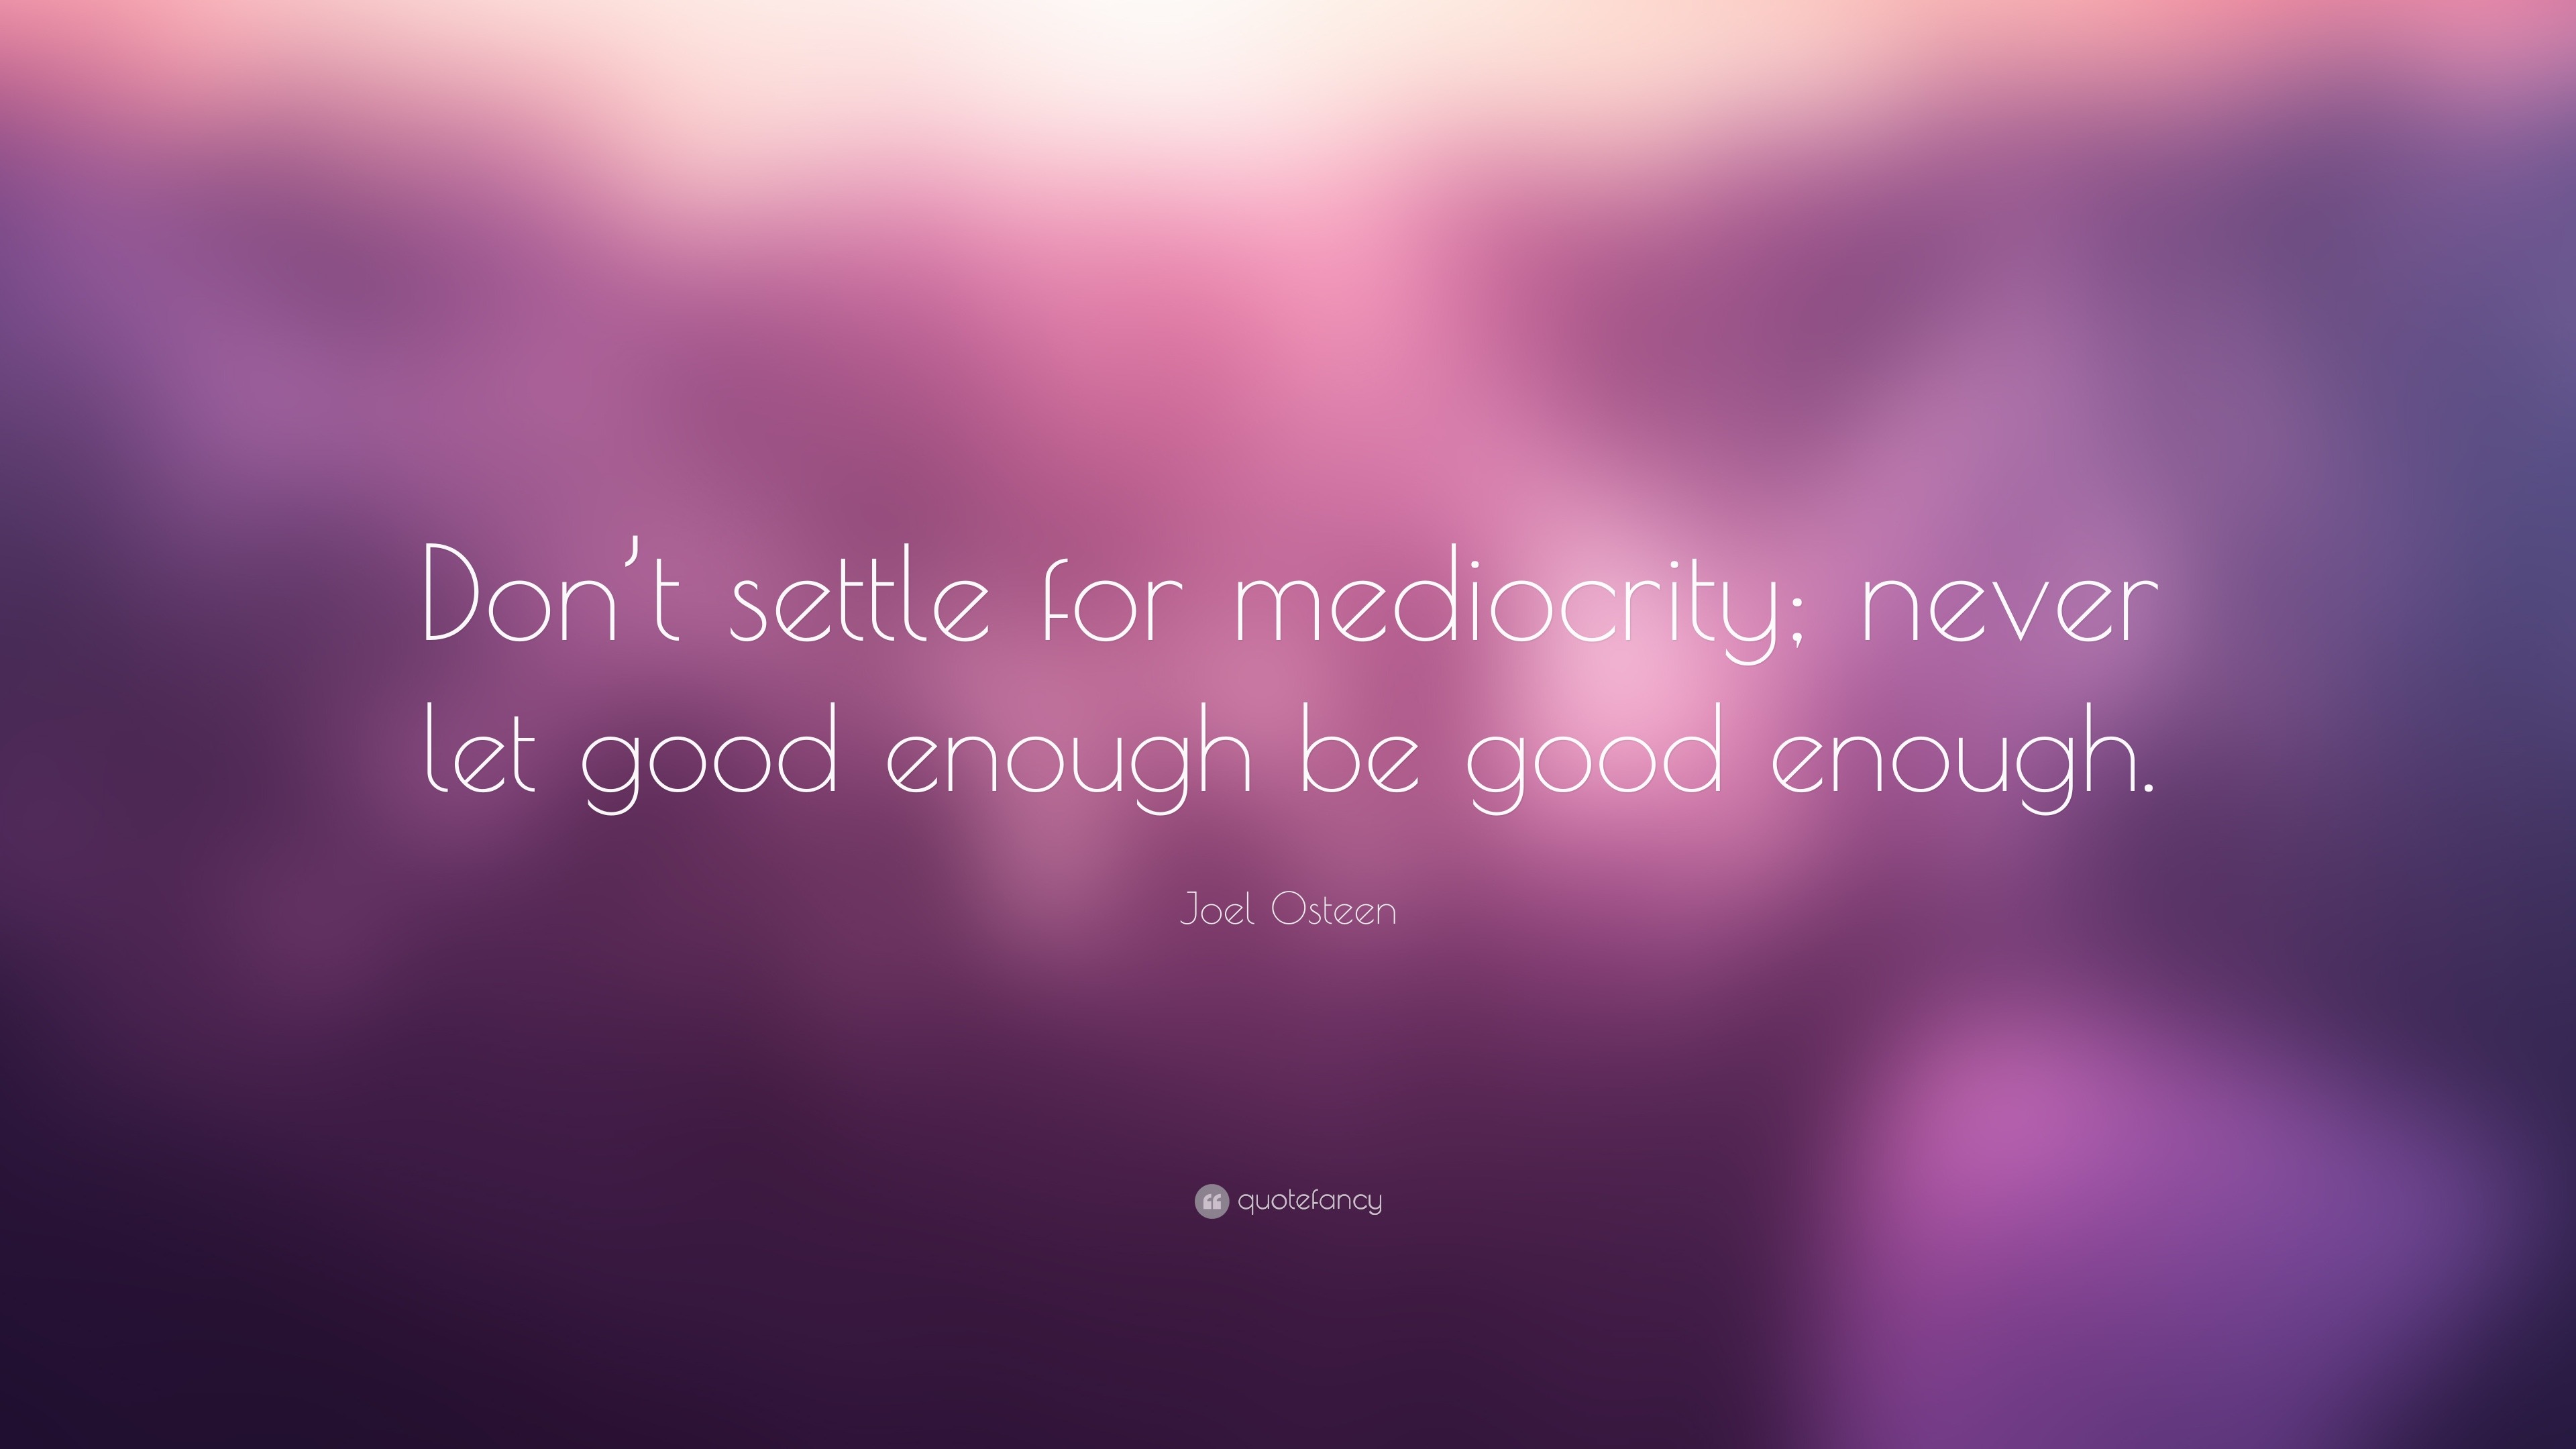 Joel Osteen Quote: “Don’t settle for mediocrity; never let good enough ...